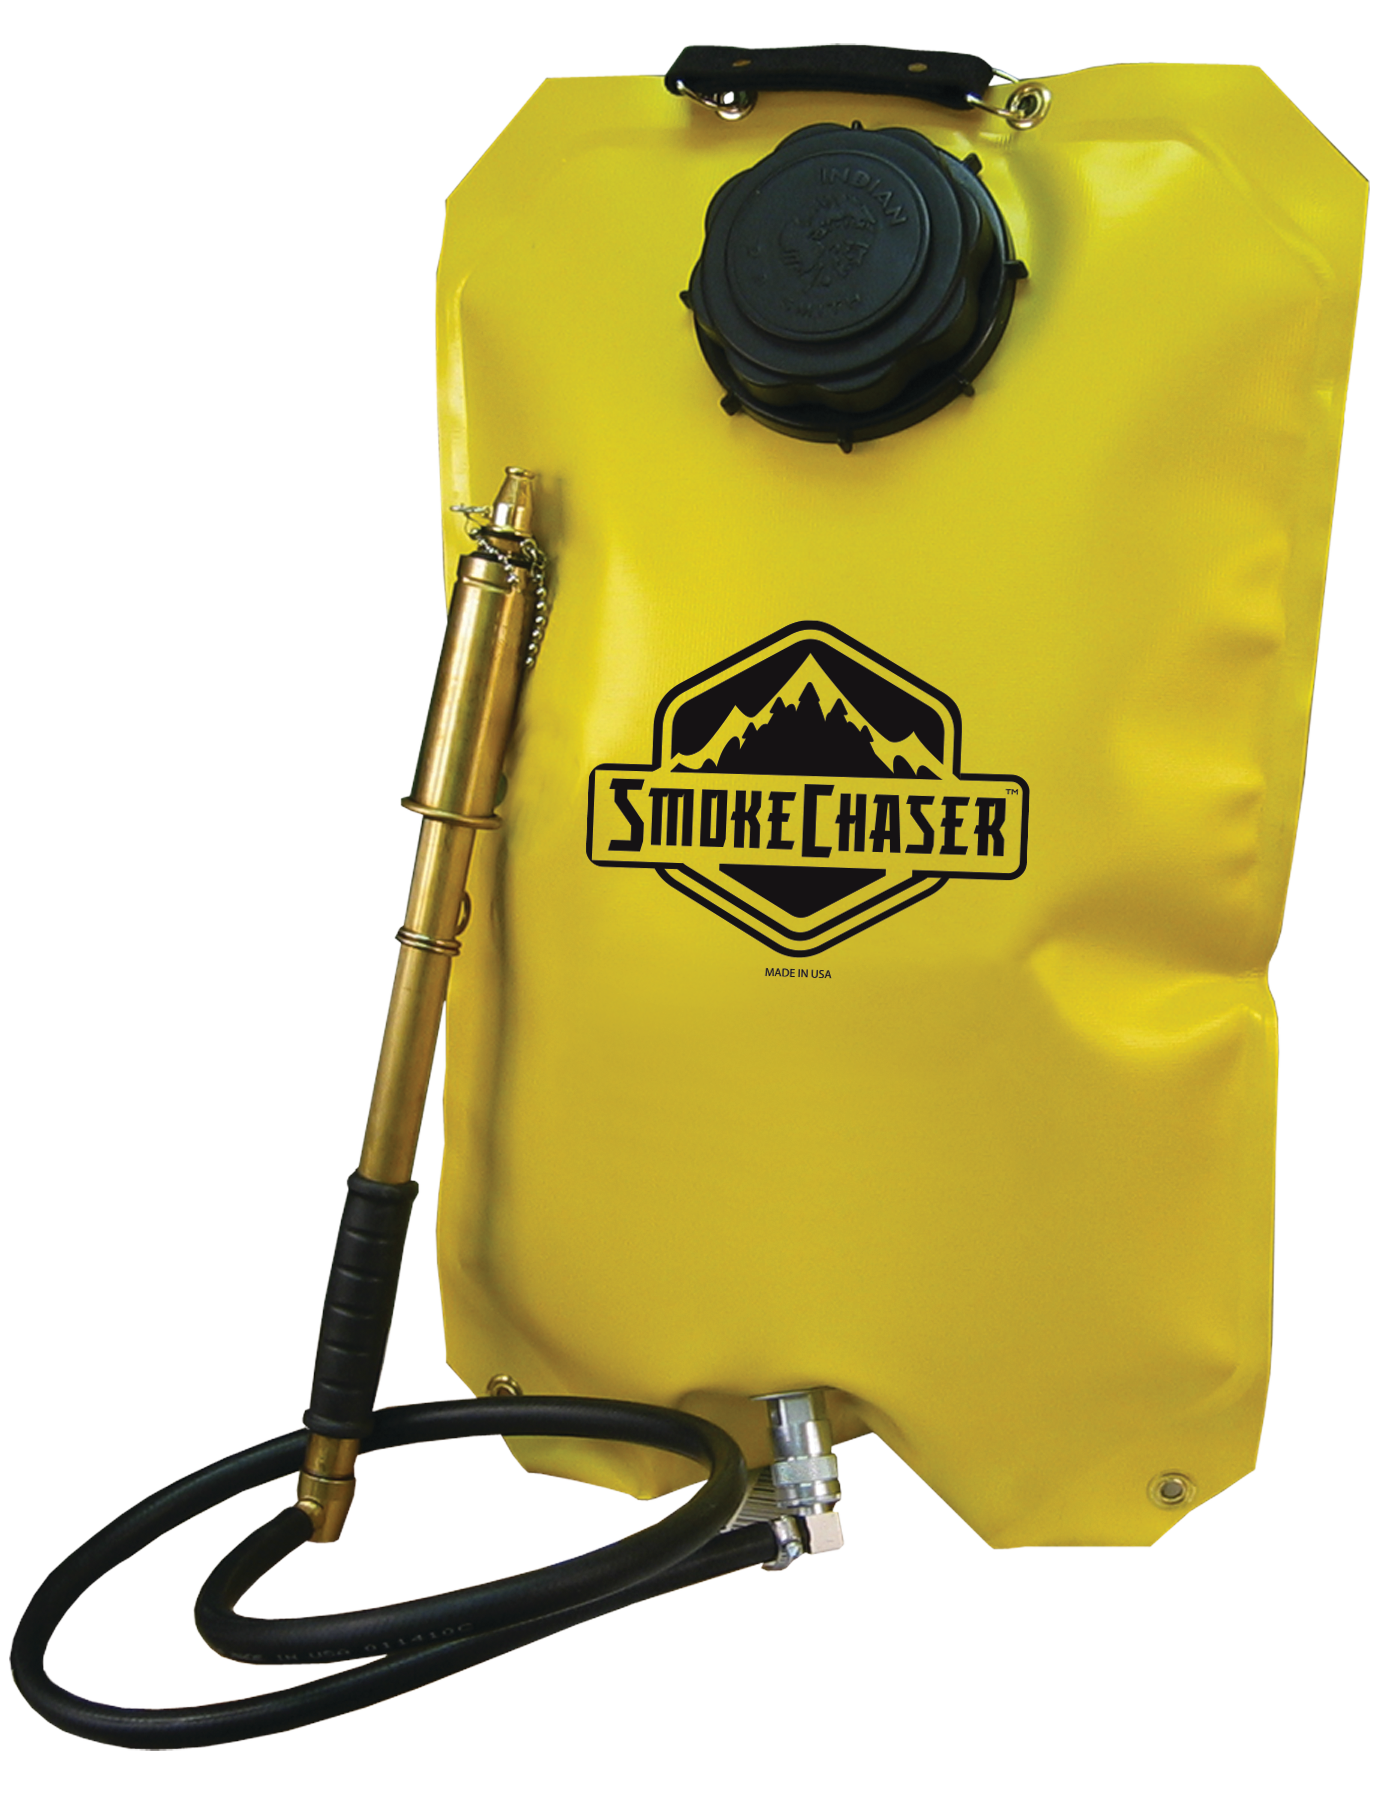 Indian&trade; SmokeChaser FSV500 5 Gal. Collapsible Vinyl Bag with Fedco FP100 Fire Pump, Model 17906V